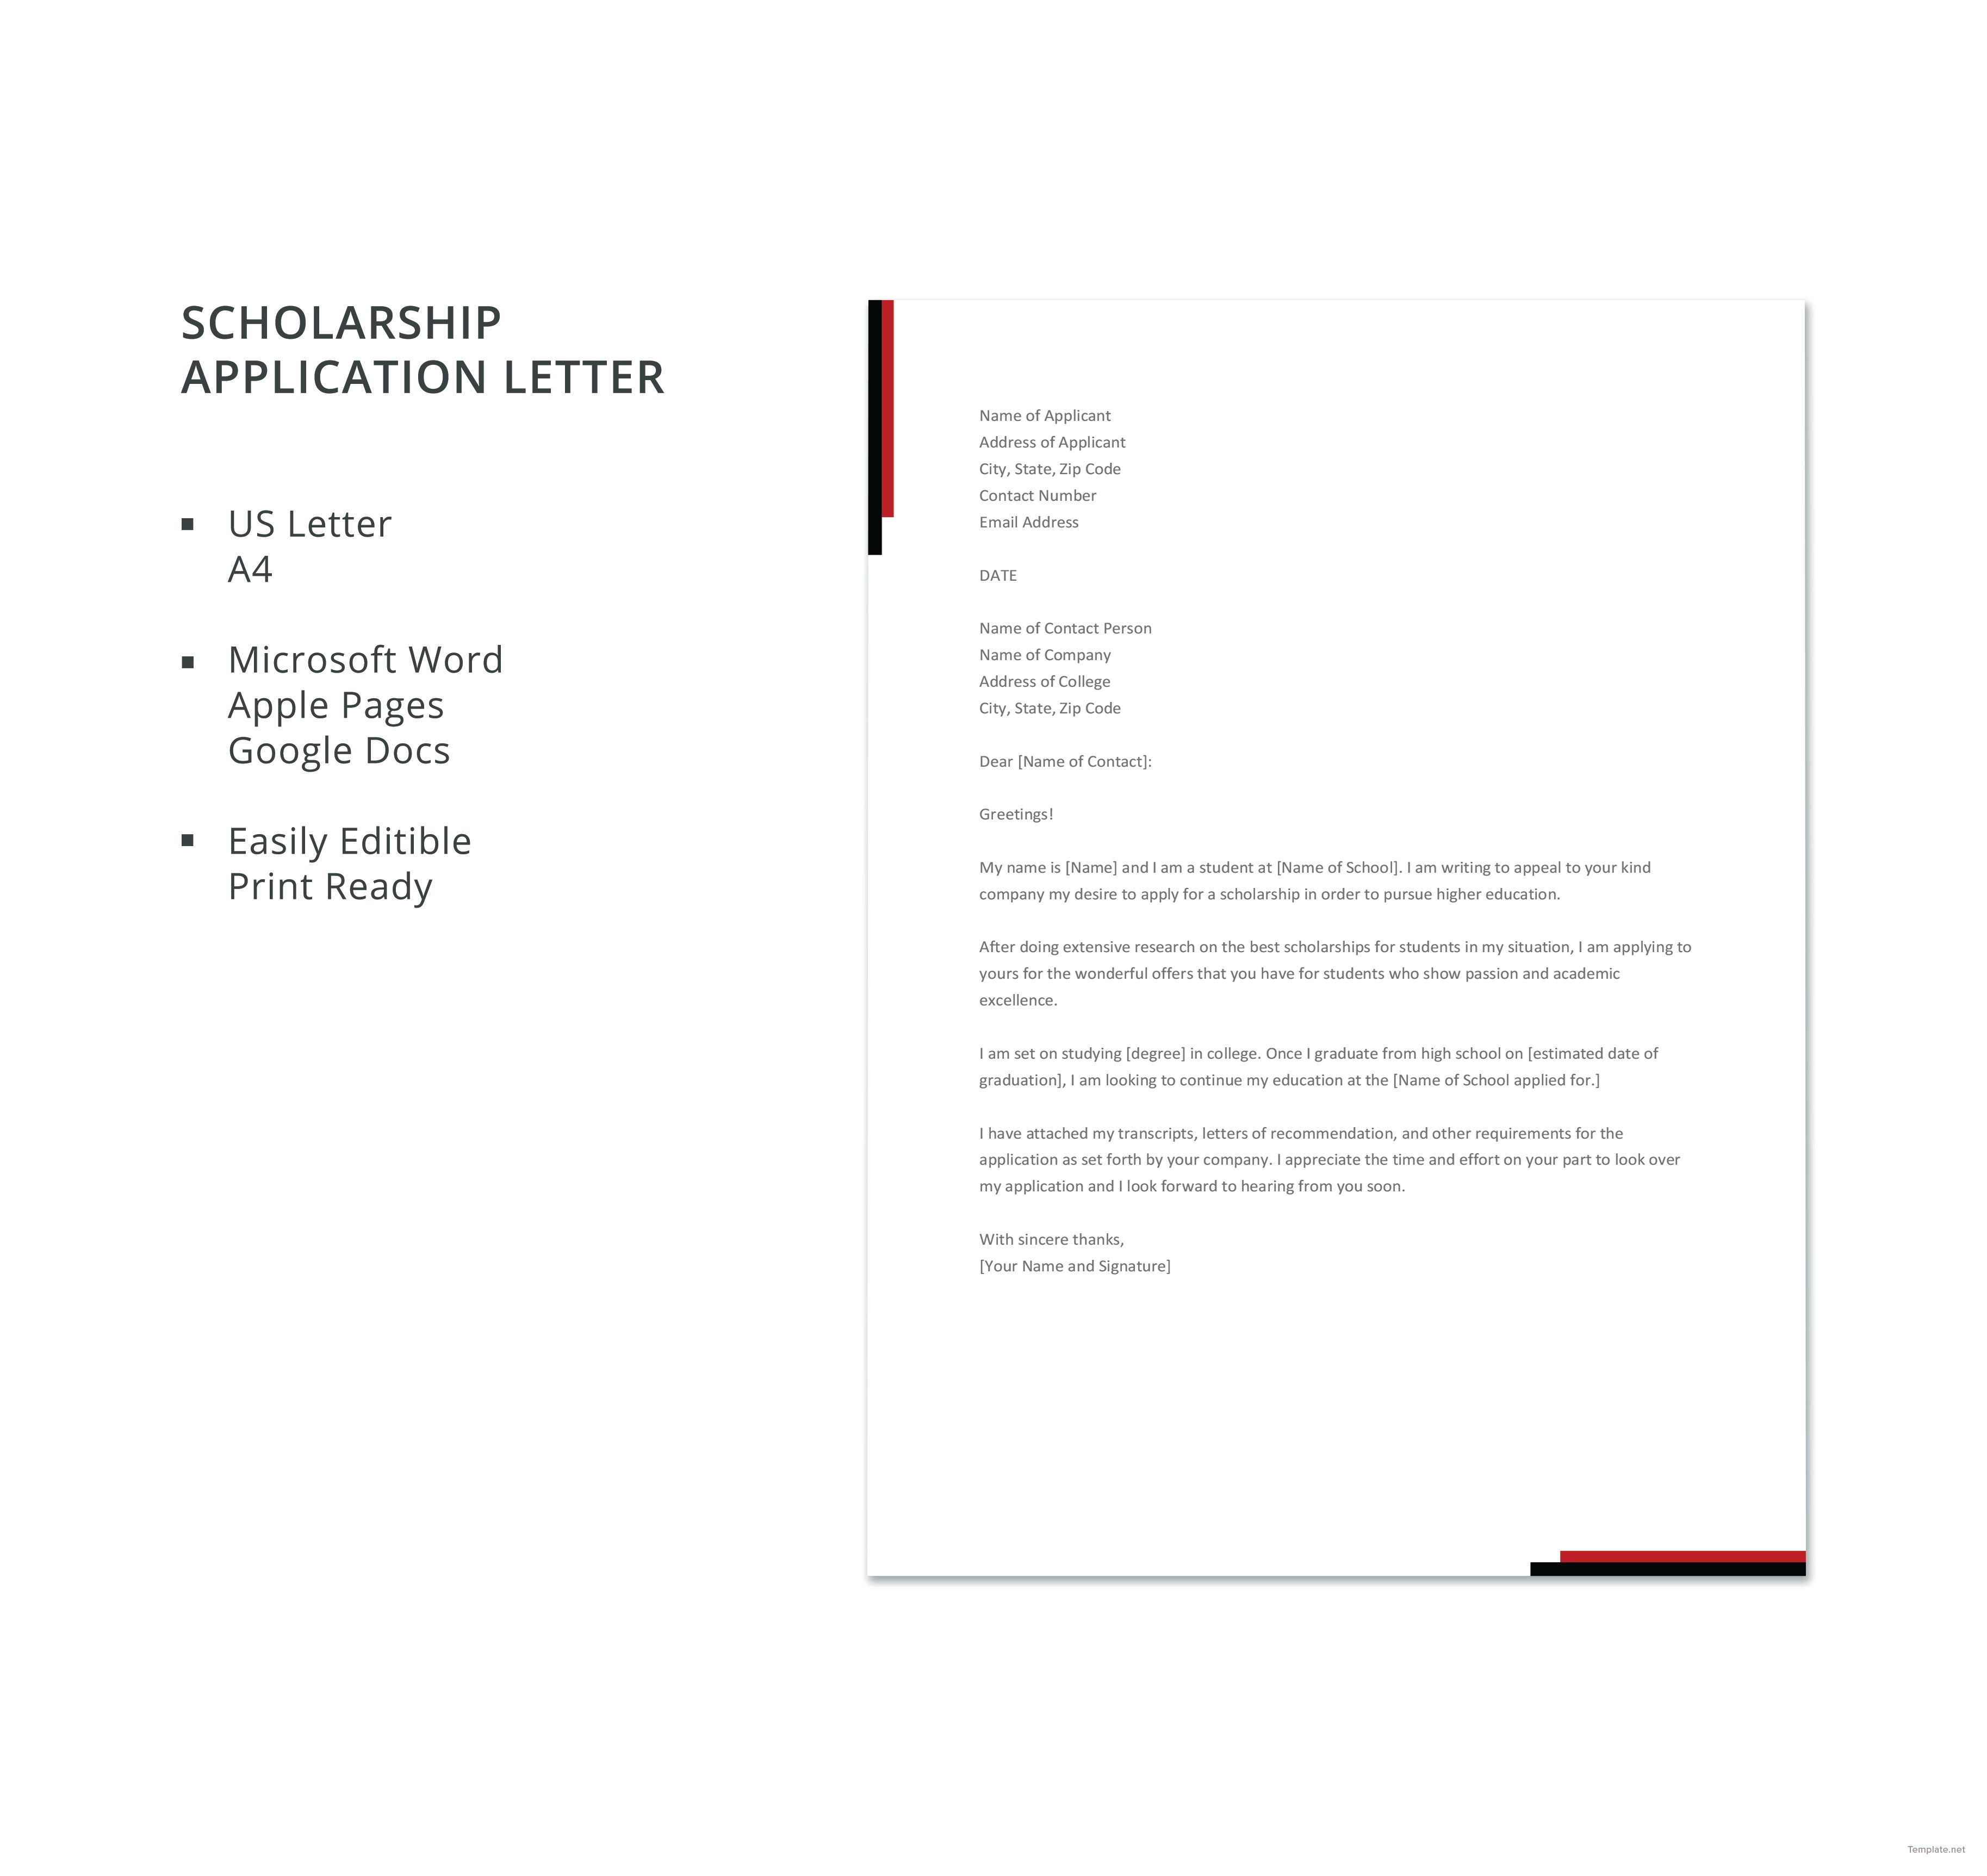 wipo scholarship application letter format